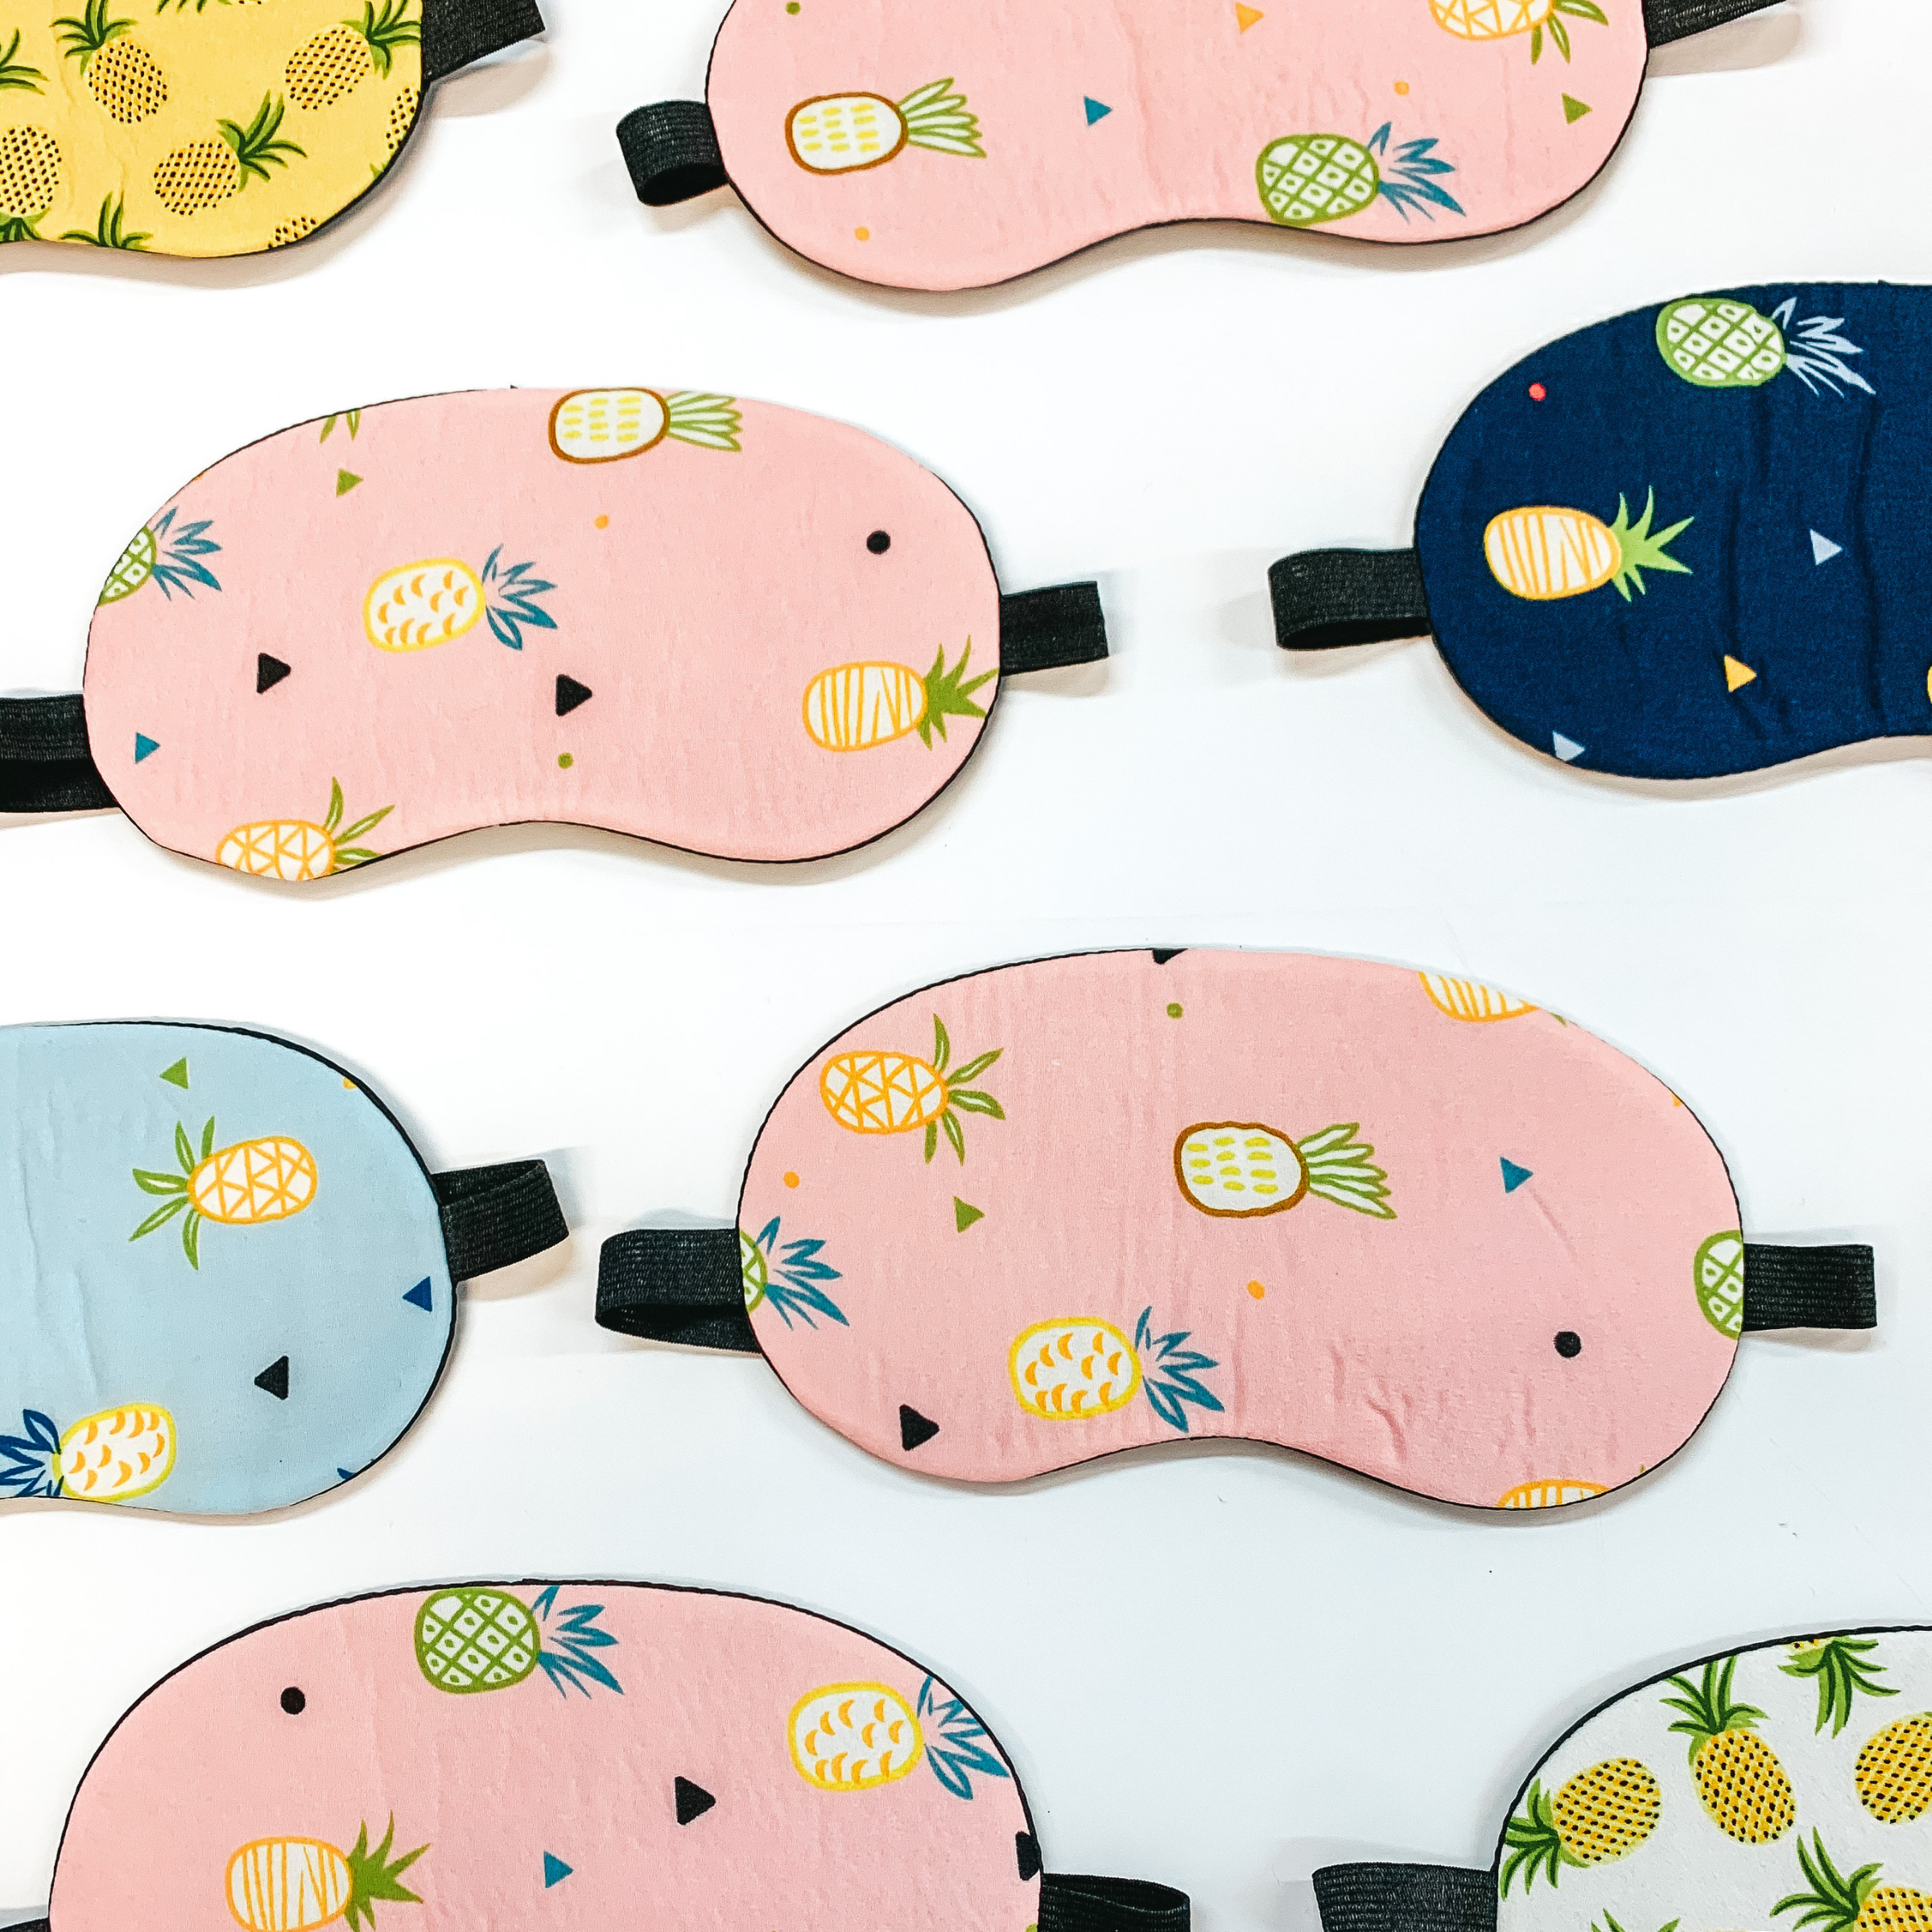 Buy 3 for $10 | Sleep Eye Covers in Assorted Pineapple Prints - Giddy Up Glamour Boutique